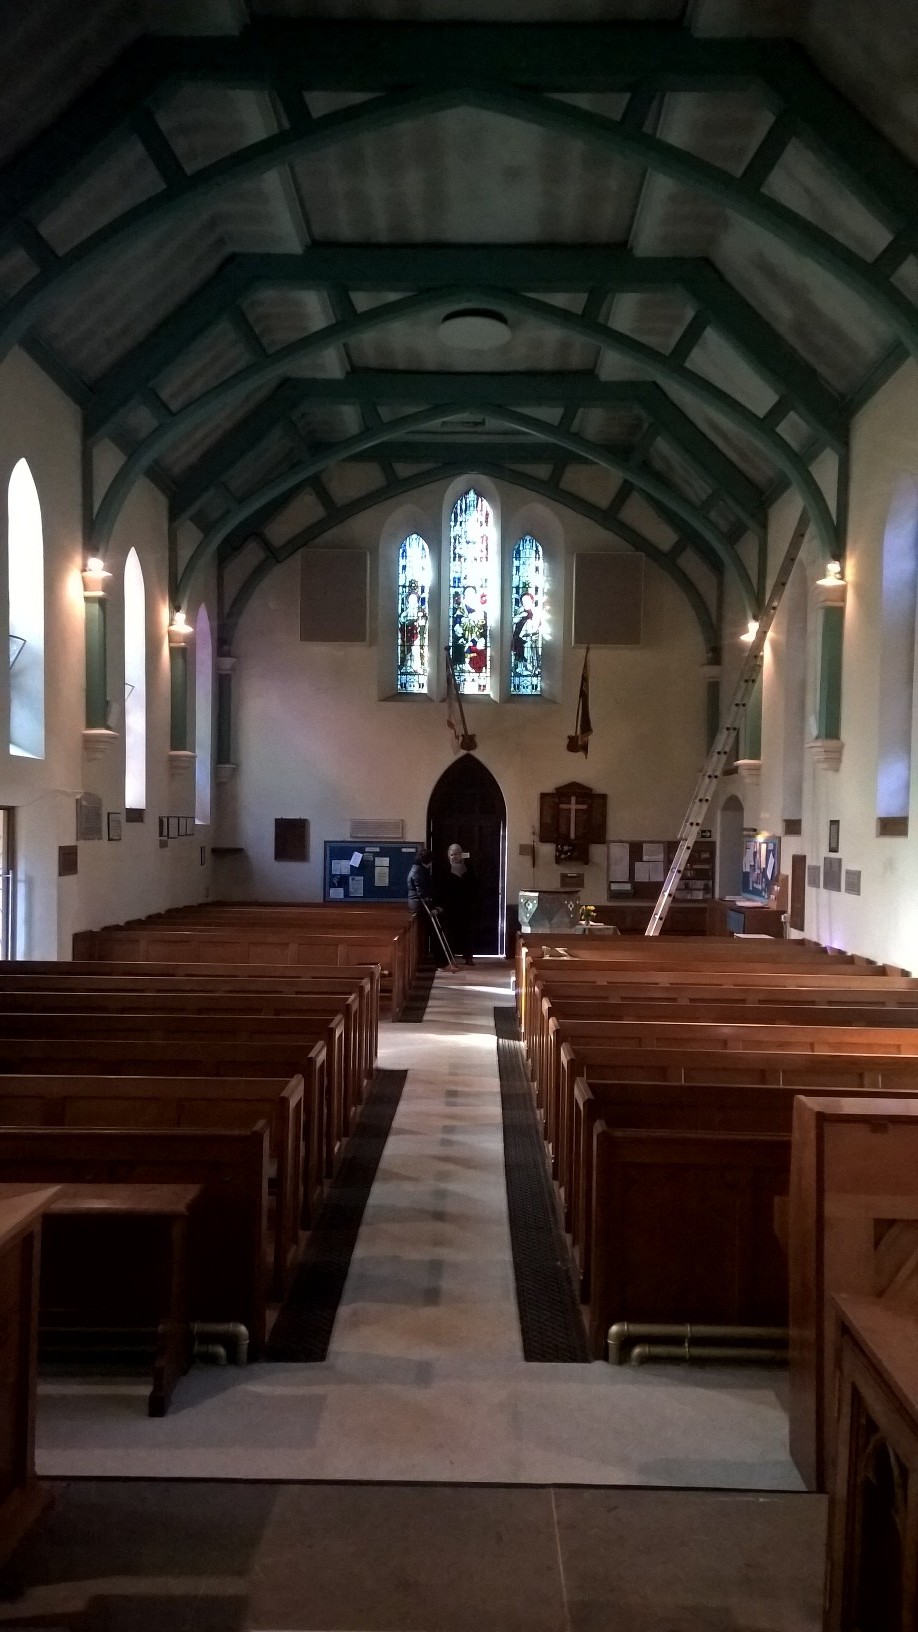 The interior of St John the Baptist church, showing the refurbishment of the interior taking place